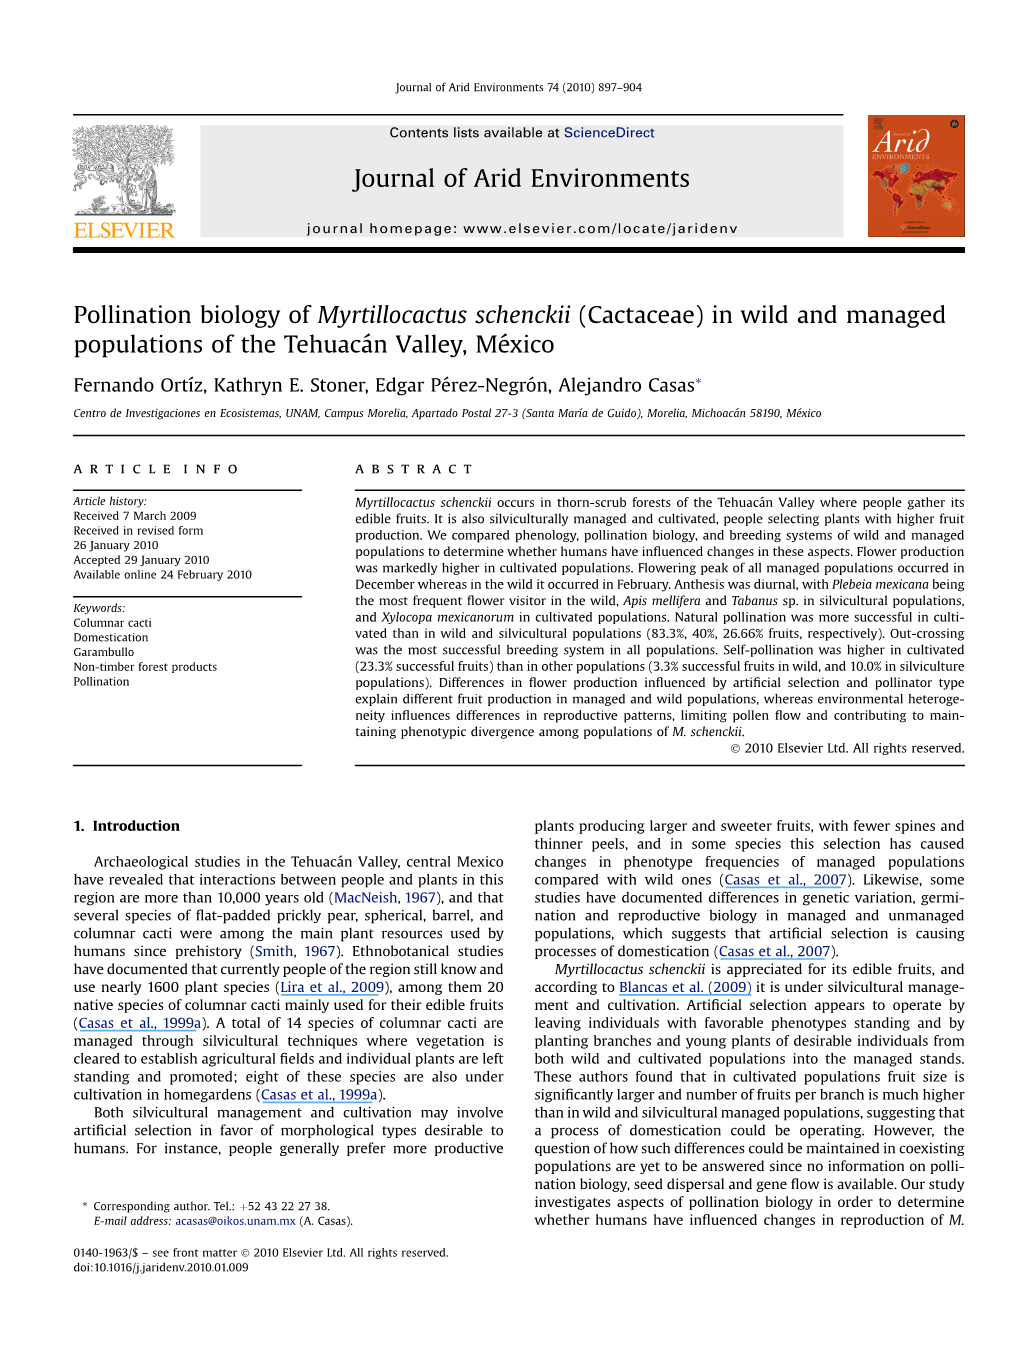 Pollination Biology of Myrtillocactus Schenckii (Cactaceae) in Wild and Managed Populations of the Tehuaca´N Valley, Me´Xico